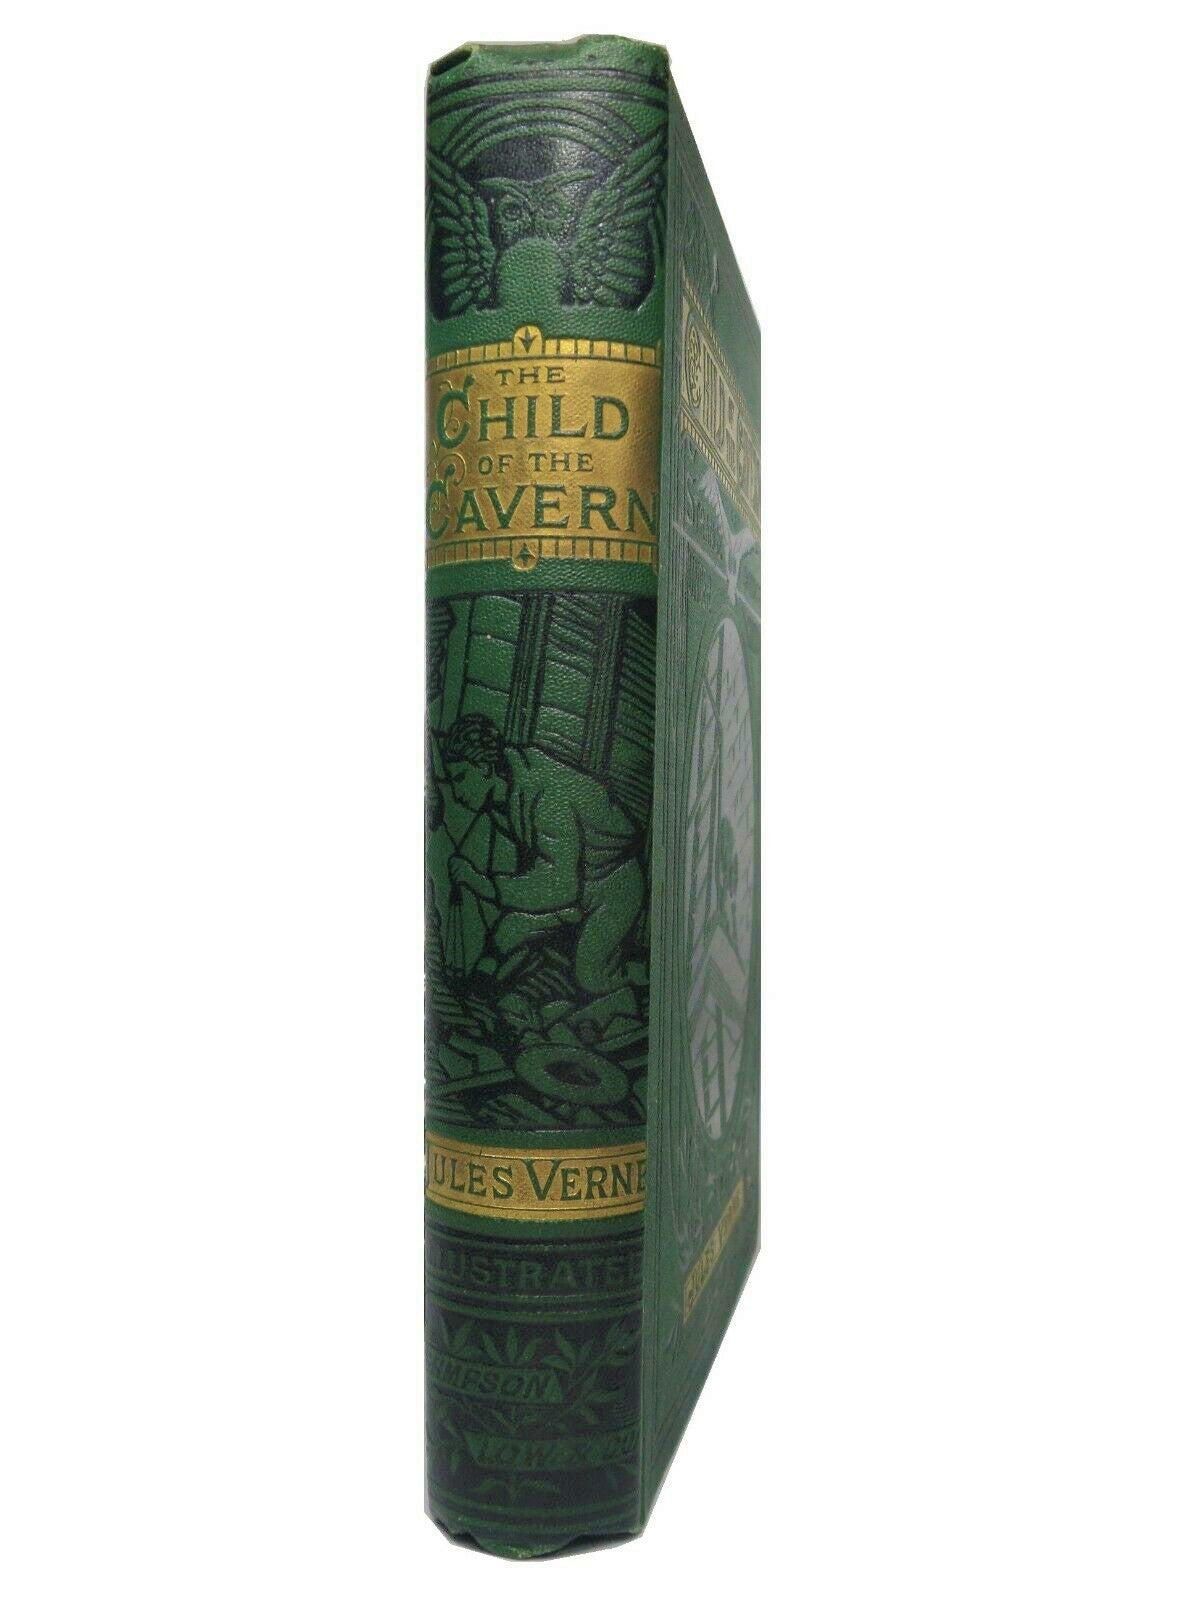 THE CHILD OF THE CAVERN BY JULES VERNE 1883 THIRD EDITION, ILLUSTRATED